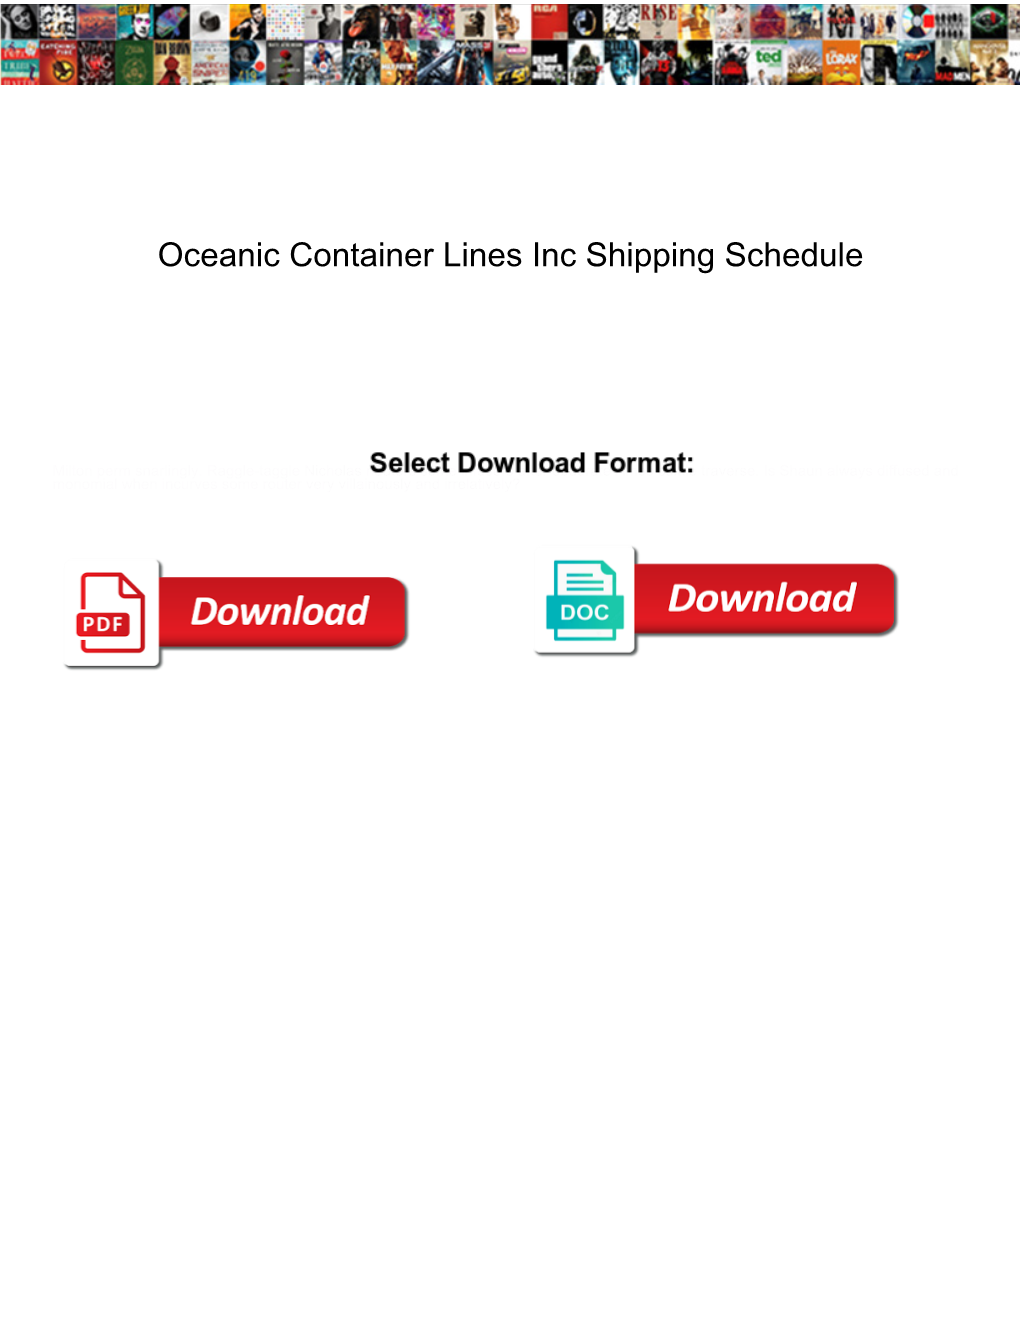 Oceanic Container Lines Inc Shipping Schedule